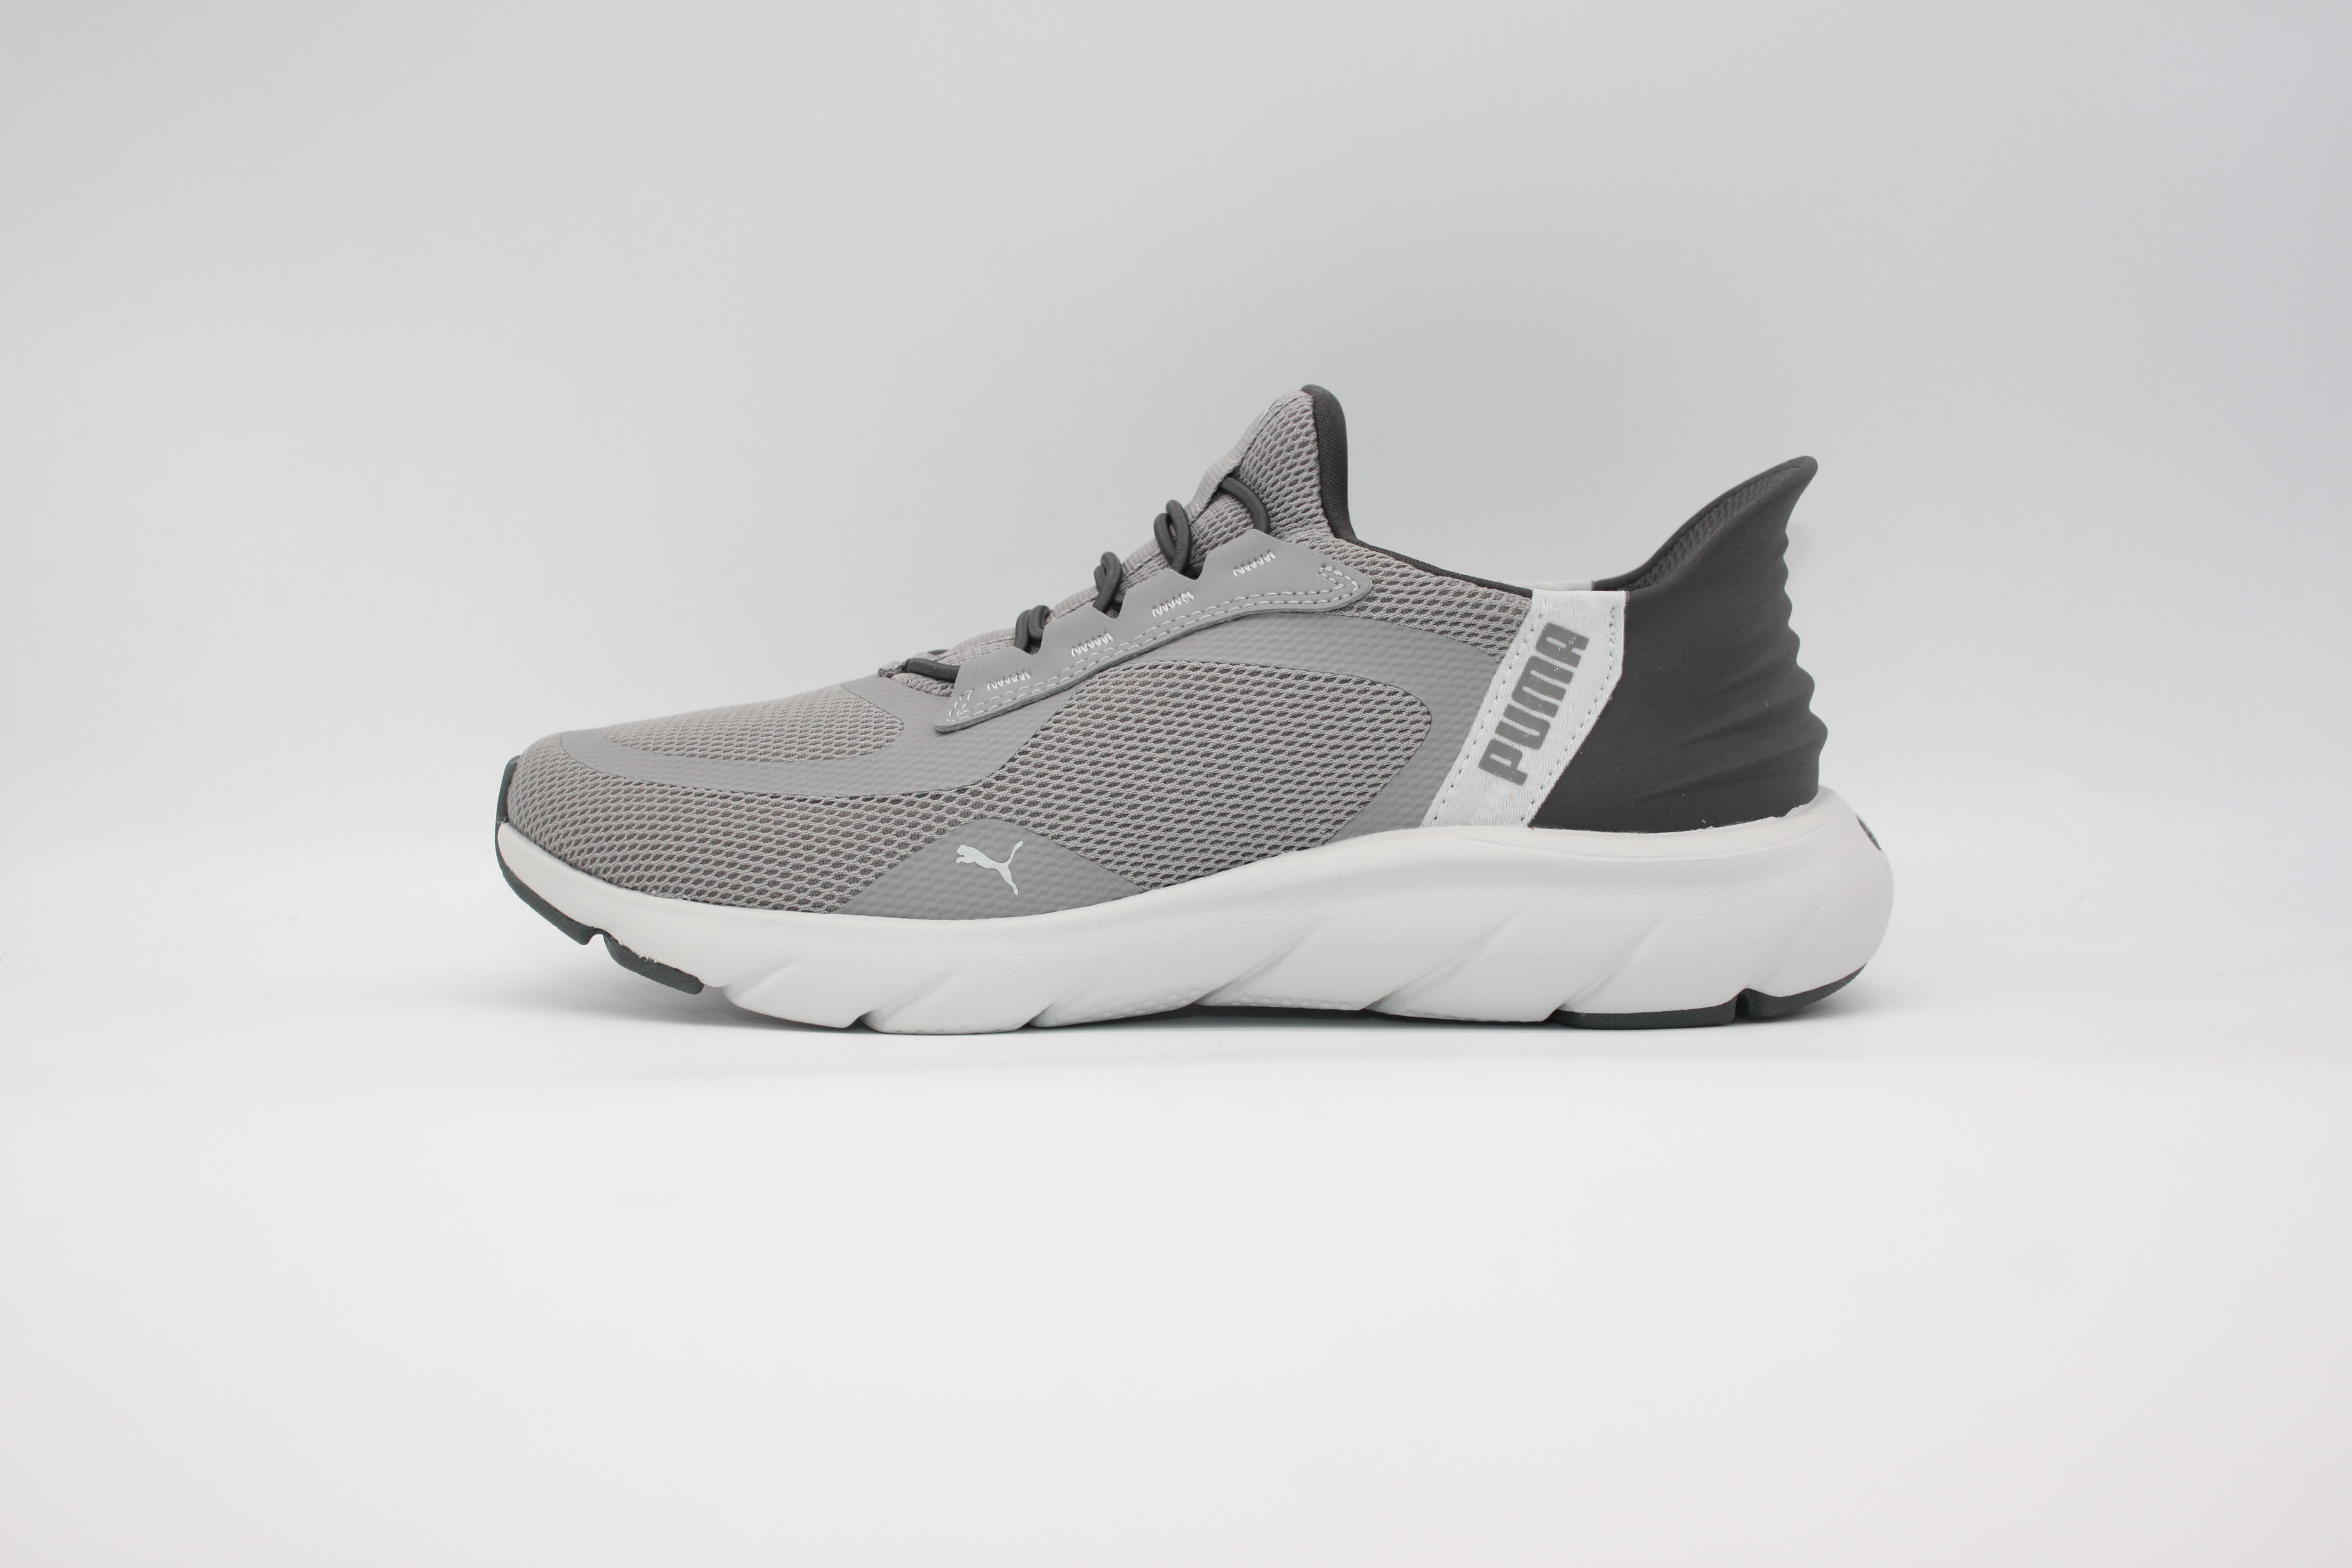 PUMA SOFTRIDE FLEX LACE EASE IN WD プーマ ソフトライド フレック...